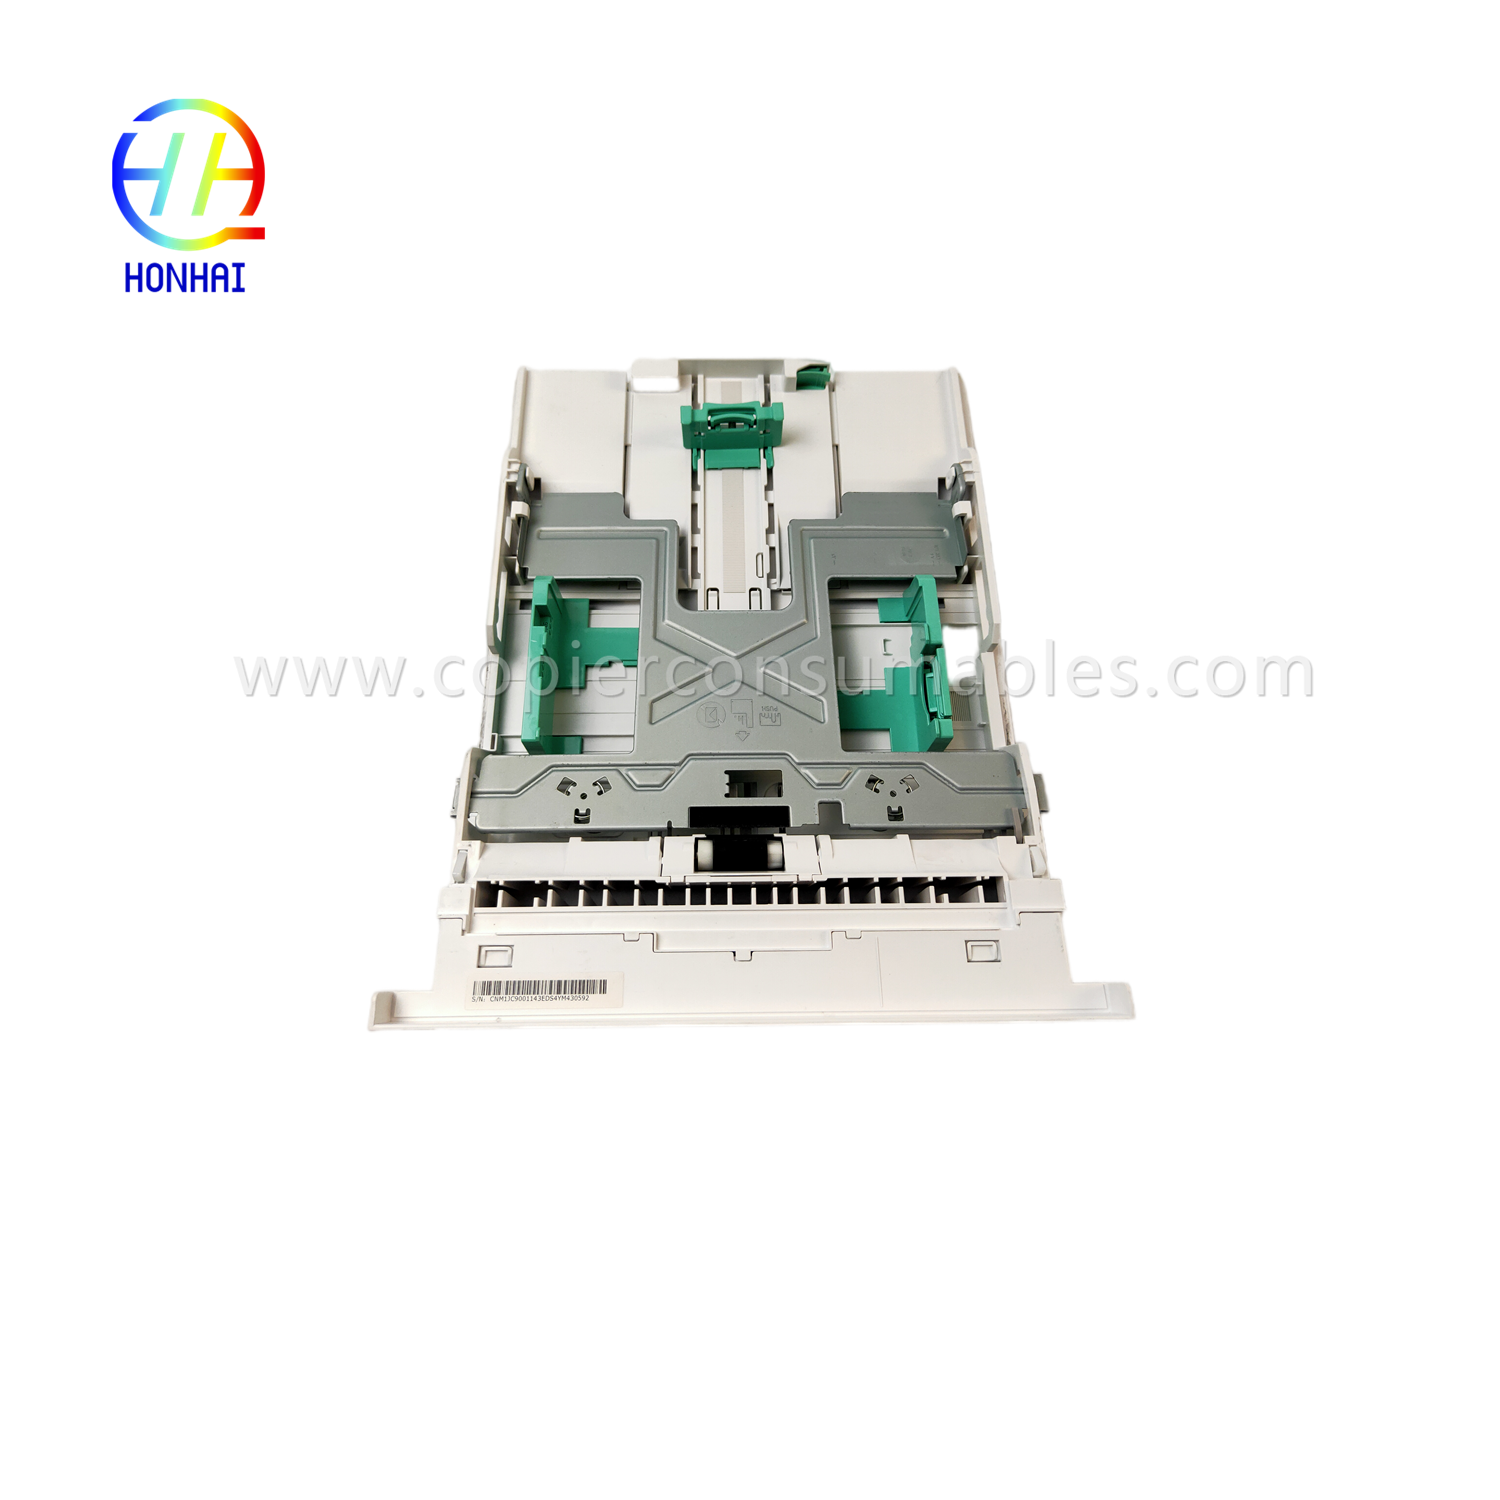 Paper Tray Assembly rau Xerox Phaser 3320DNI WorkCentre 3315DN 3325DNI 050N00650 Cassette-Paper Tais